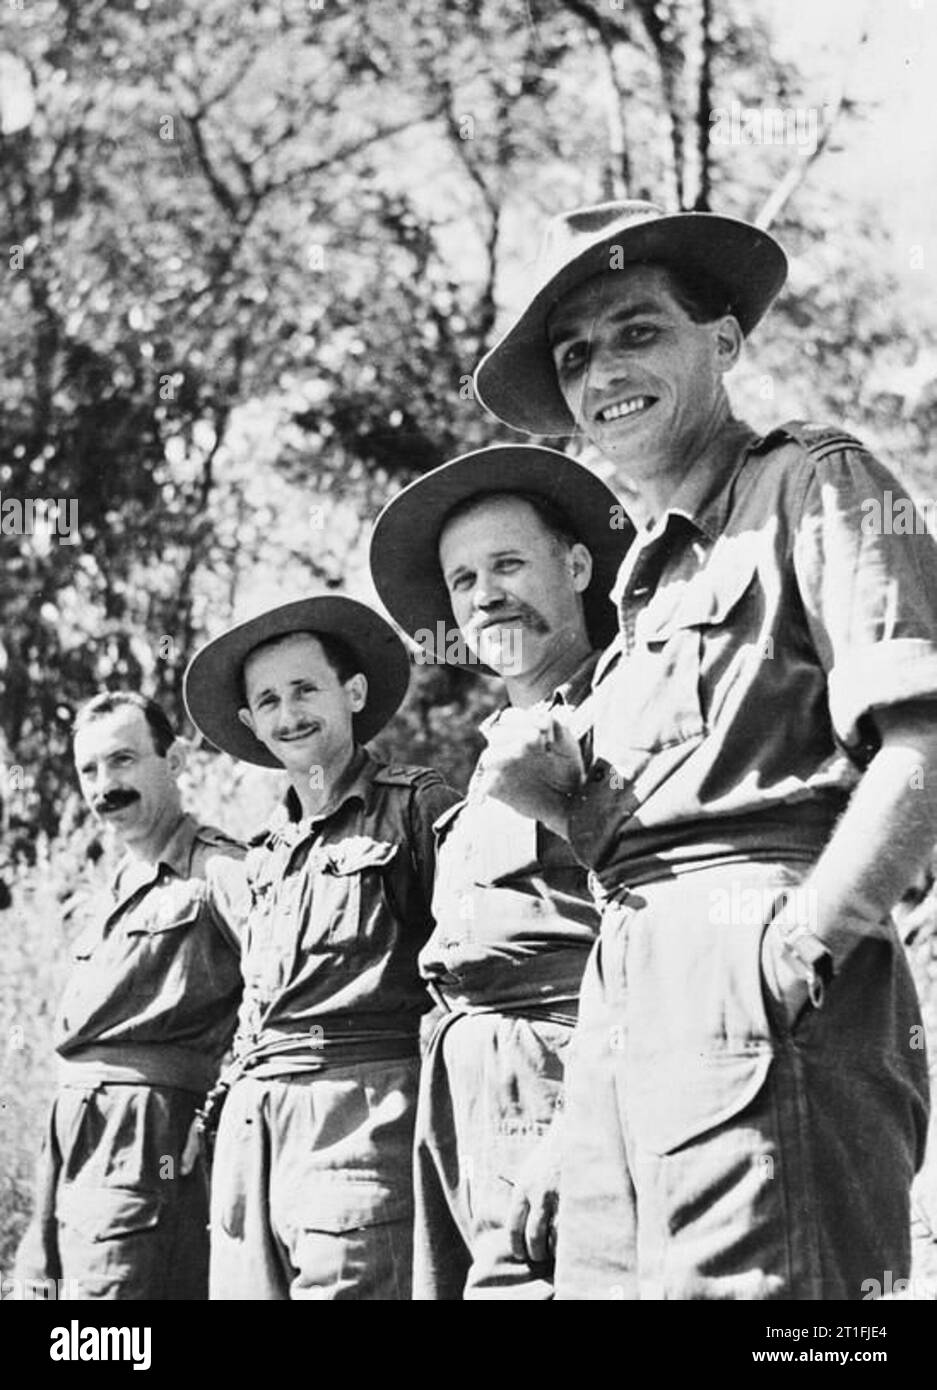 Polish officers serving with the 1st Battalion, Gambia Regiment (6st West African Infantry Brigade, 81st West African Division) during the Third Arakan Campaign. Left to right: Lieutenant Adam Grzywacz, D and X Companies; Lieutenant Wies?aw Bulkowski (or Bu?kowski), Mortar Platoon; Captain Jan K. ?ele?nik MC, Mortar Platoon and A Company; Major Stanis?aw Lisiecki, the CO of the B Company. Stock Photo